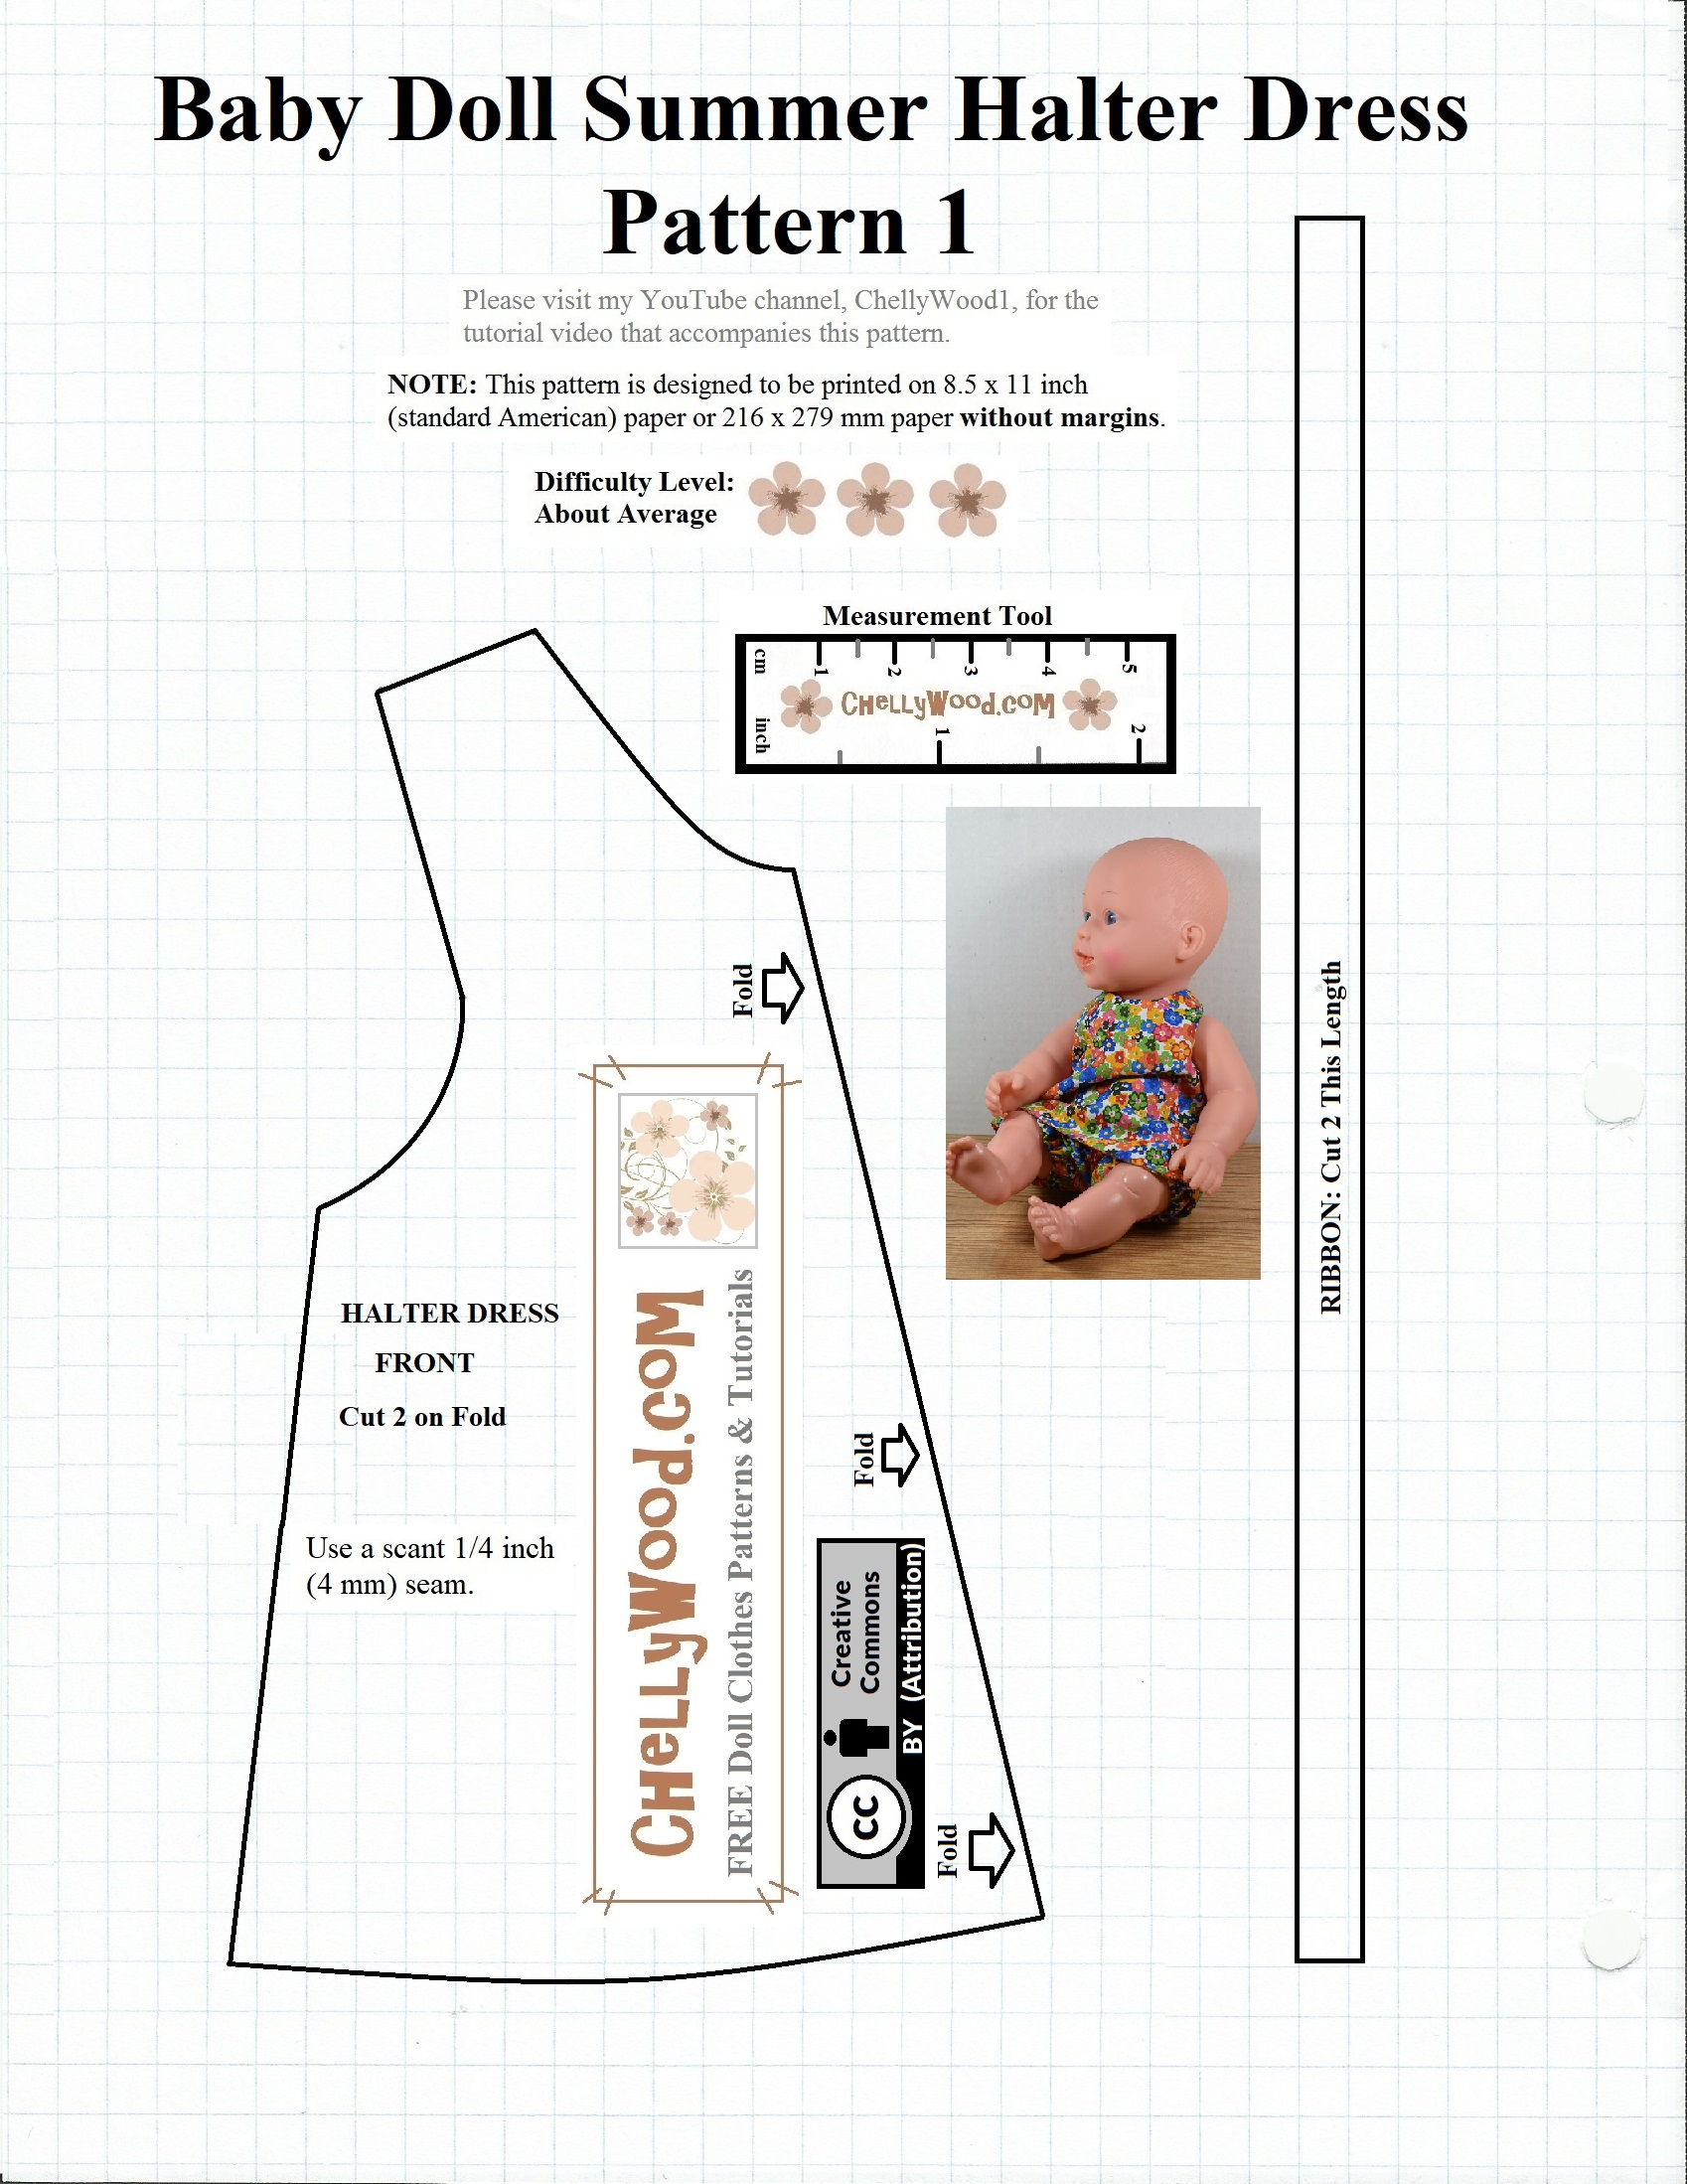 Free #sewing Pattern For Baby #dolls @ Chellywood #crafts - Free Printable Sewing Patterns